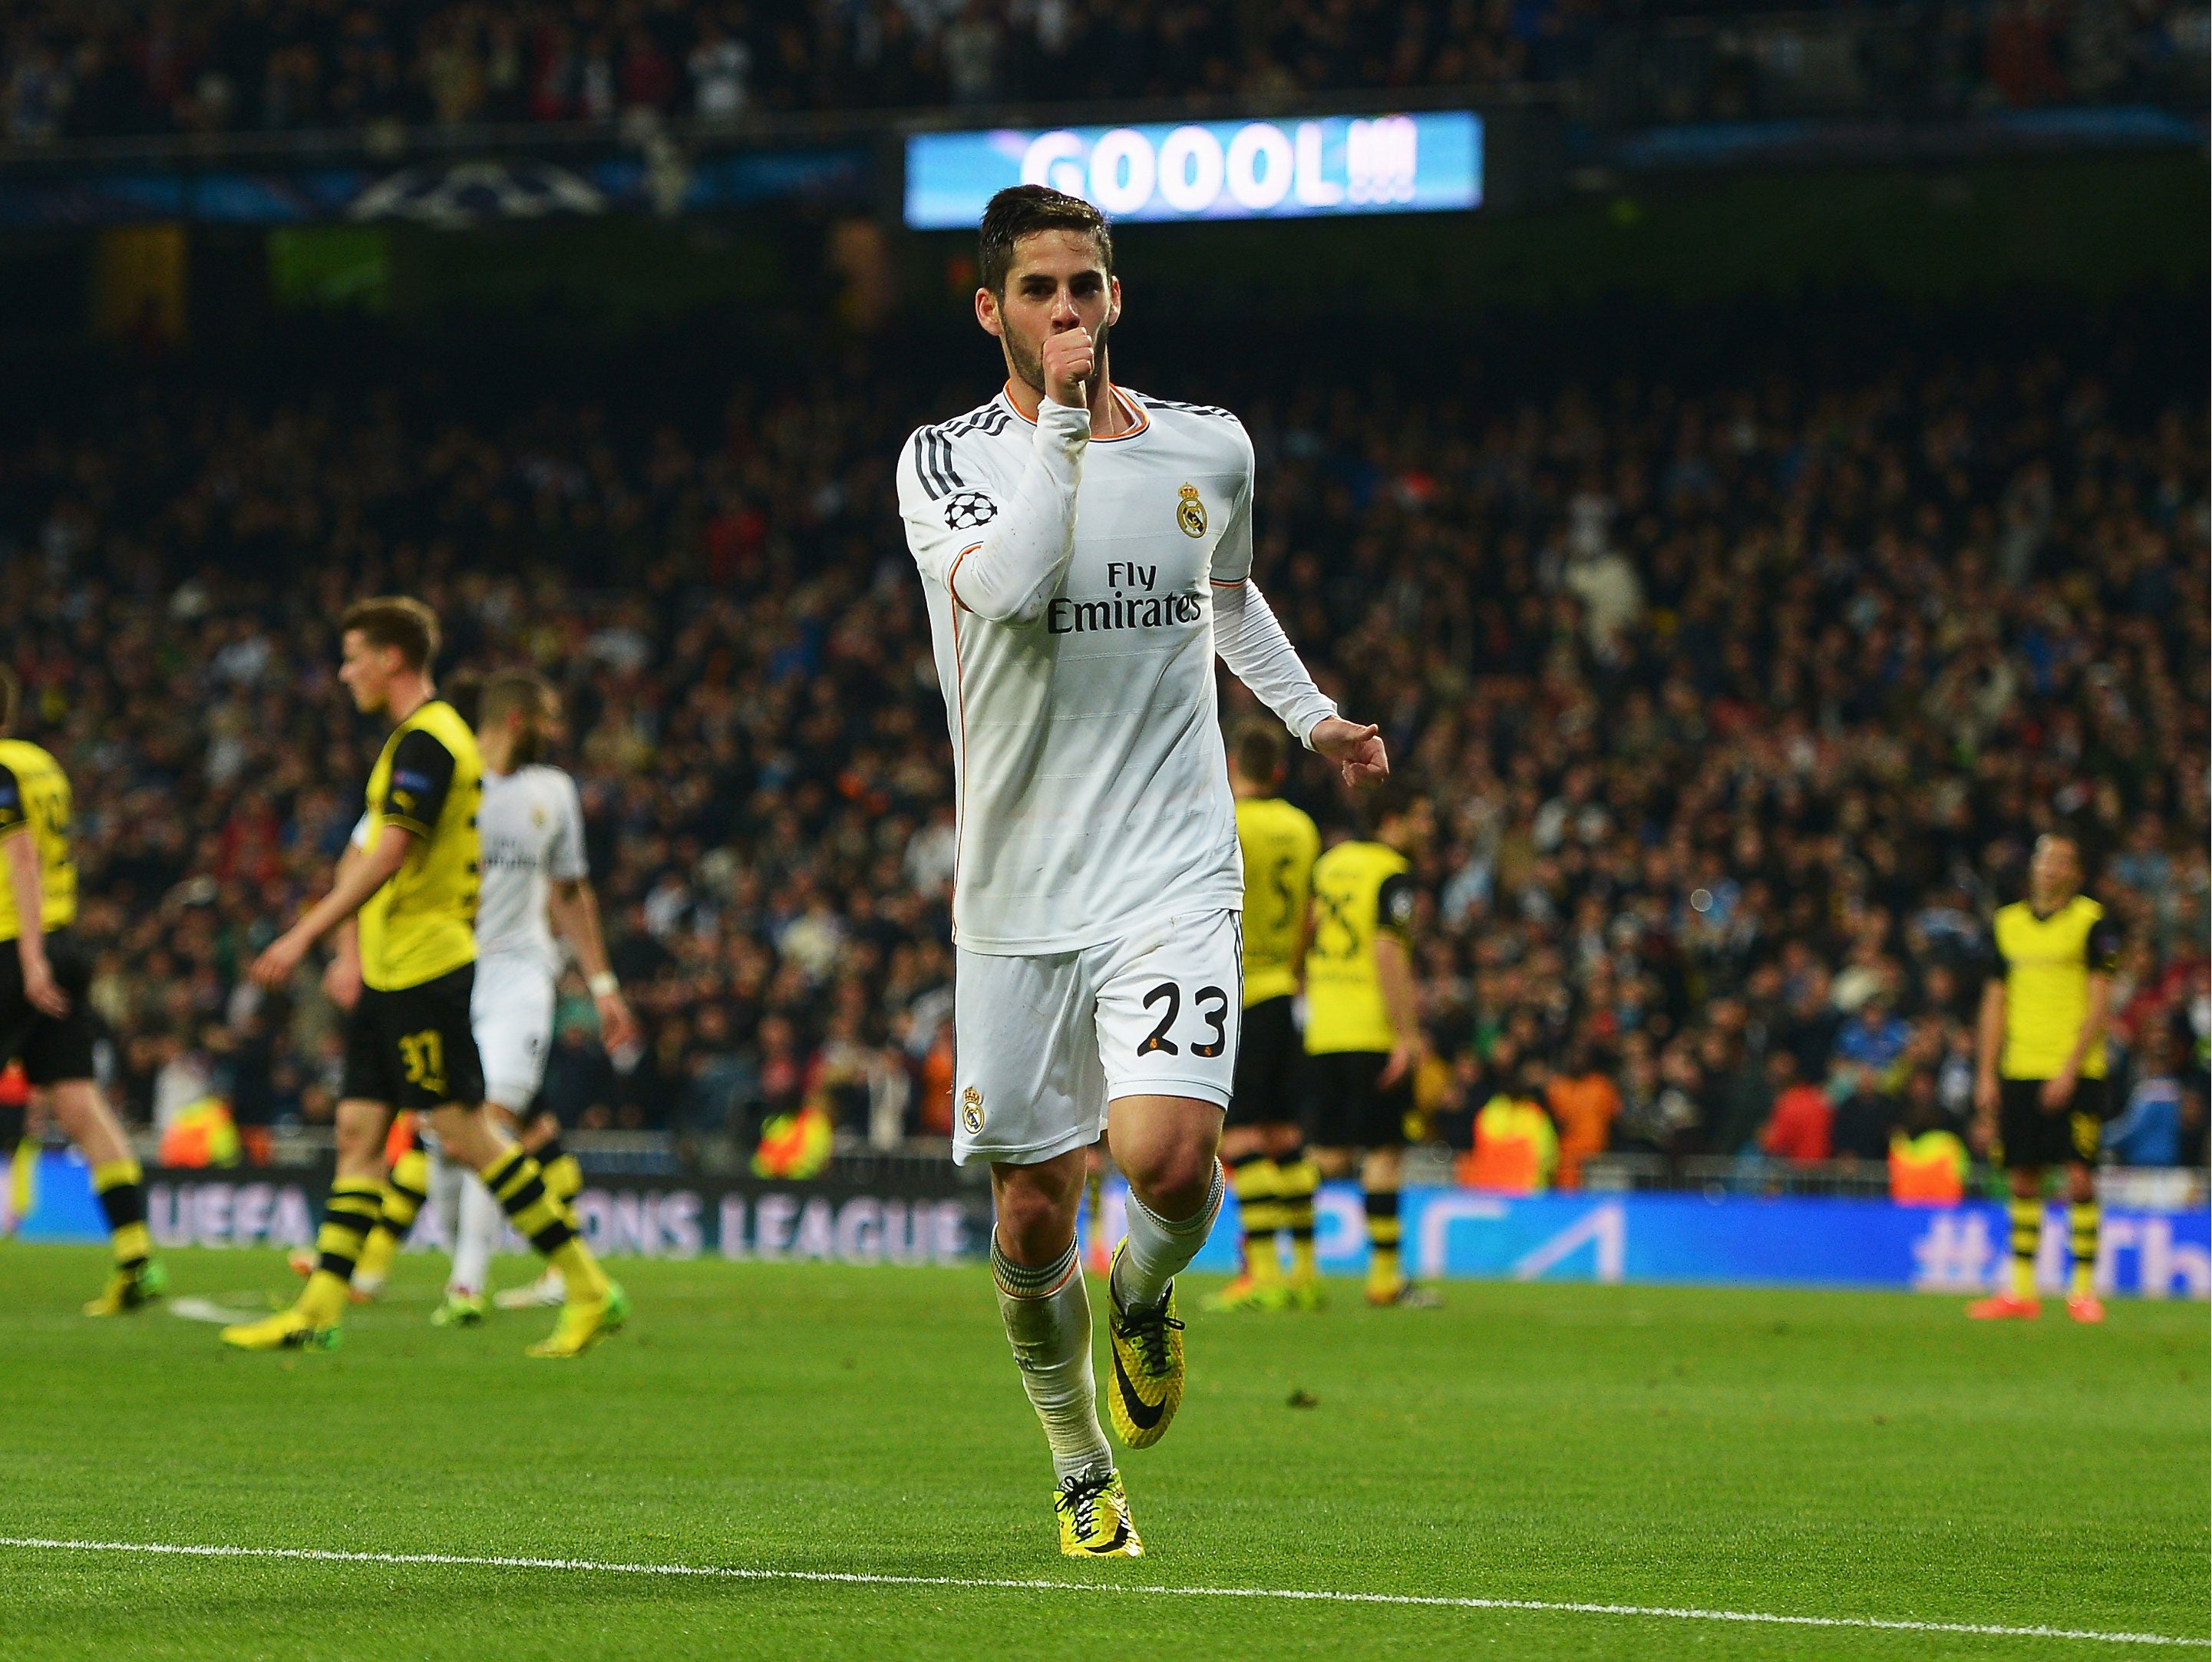 Manchester City are interested in Isco who could be surplus to requirements at Real Madrid